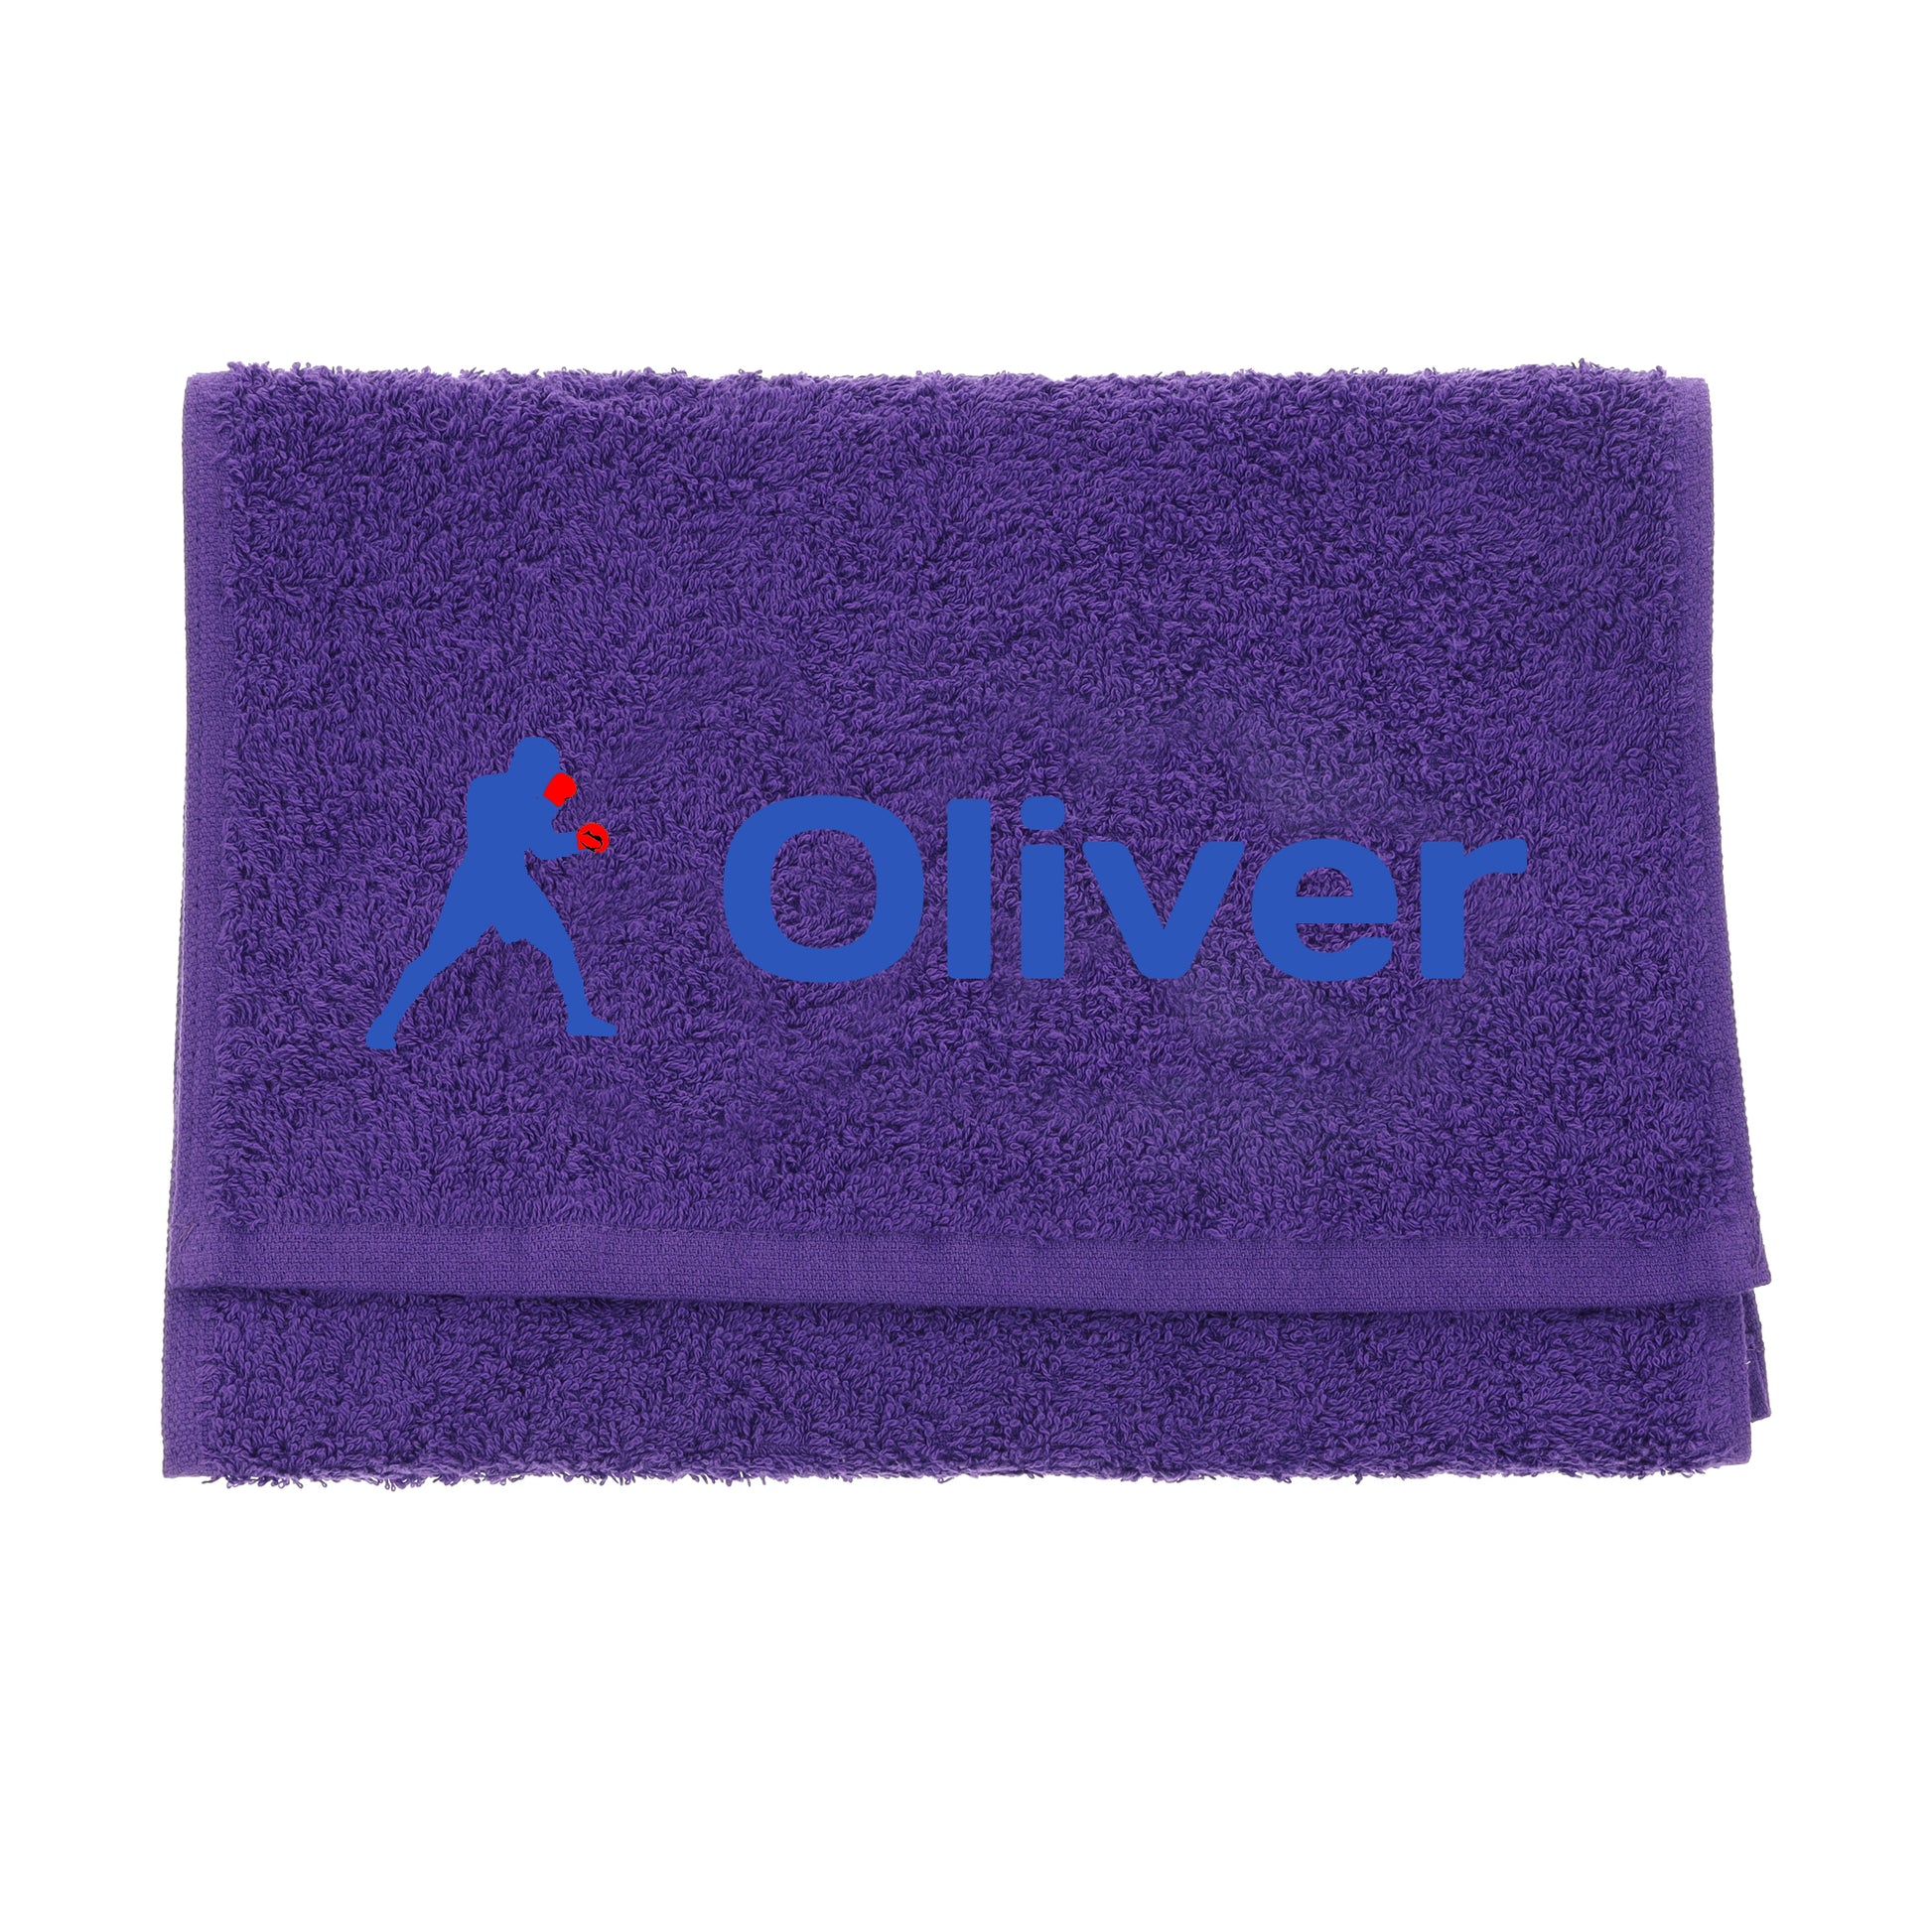 Personalised Embroidered Boxing Towel  - Always Looking Good - Purple  